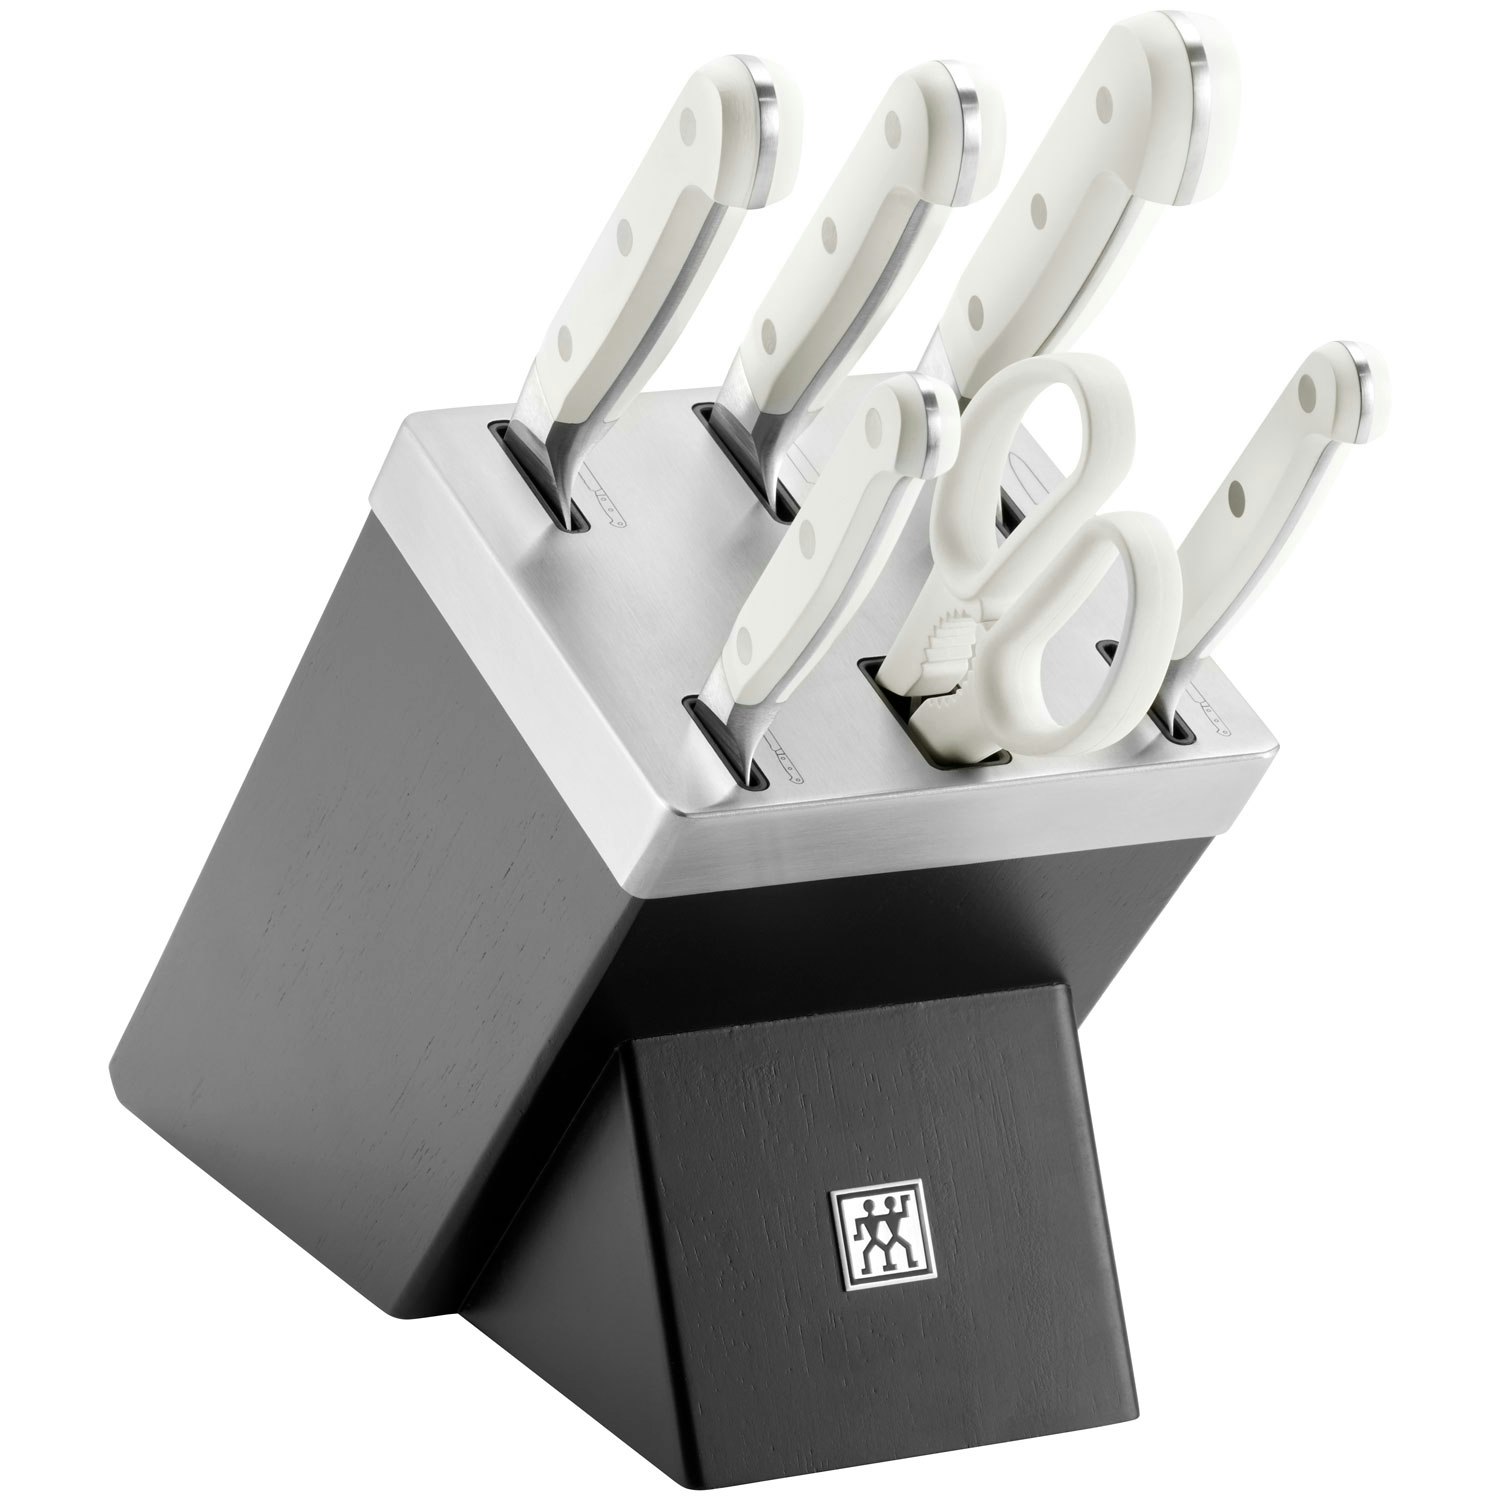 https://royaldesign.com/image/2/zwilling-pro-le-blanc-knife-block-with-knives-7-pieces-0